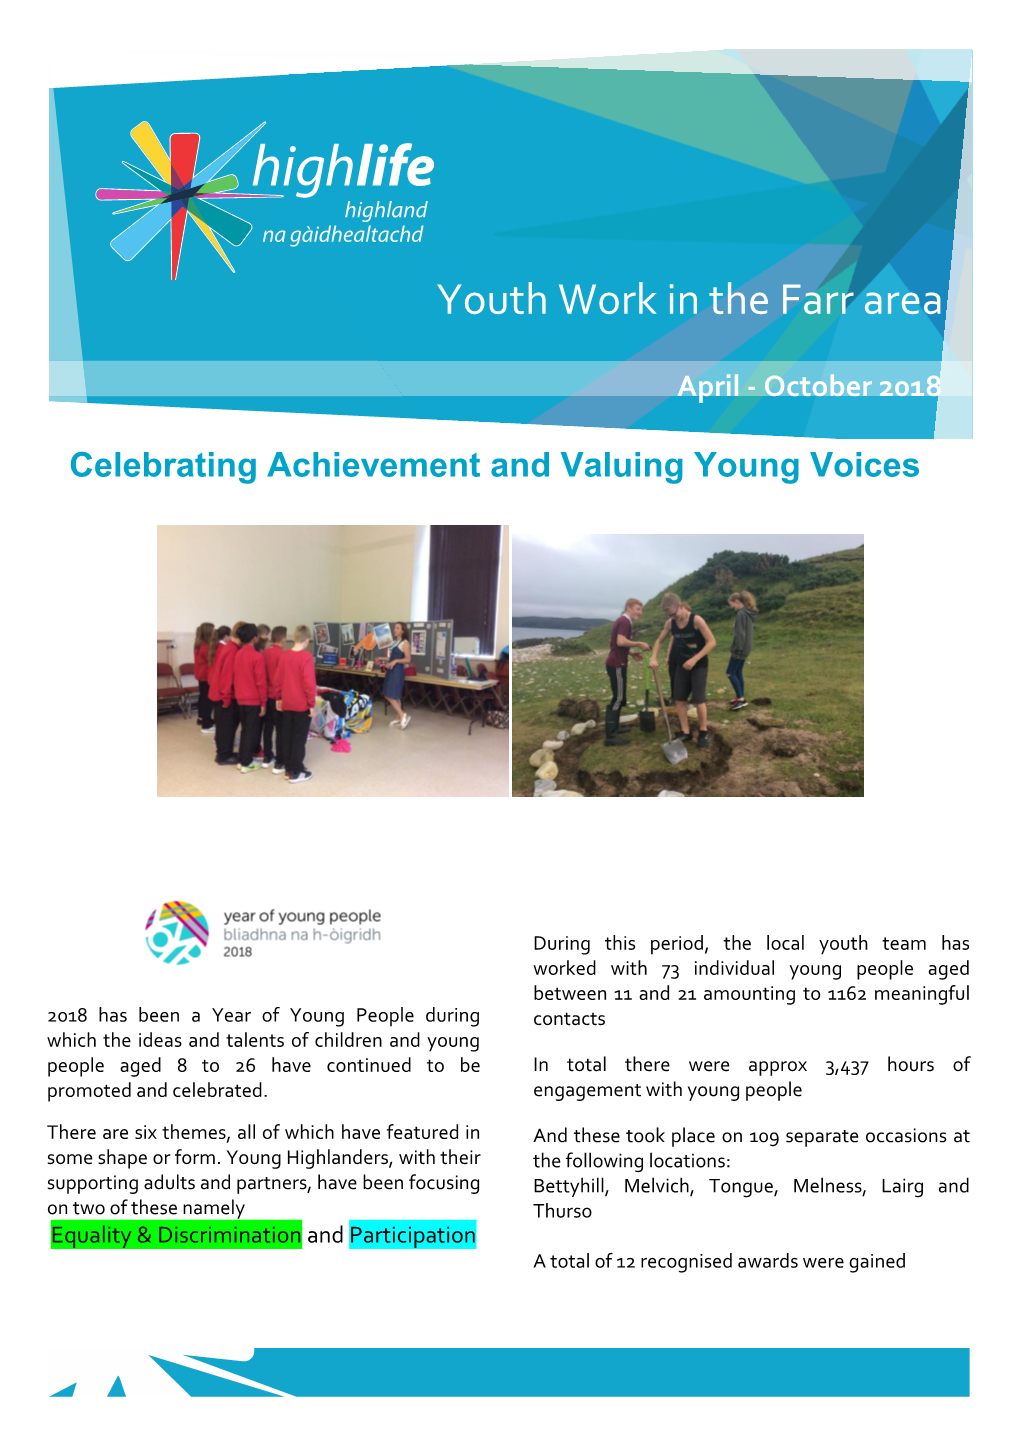 Youth Work in the Farr Area